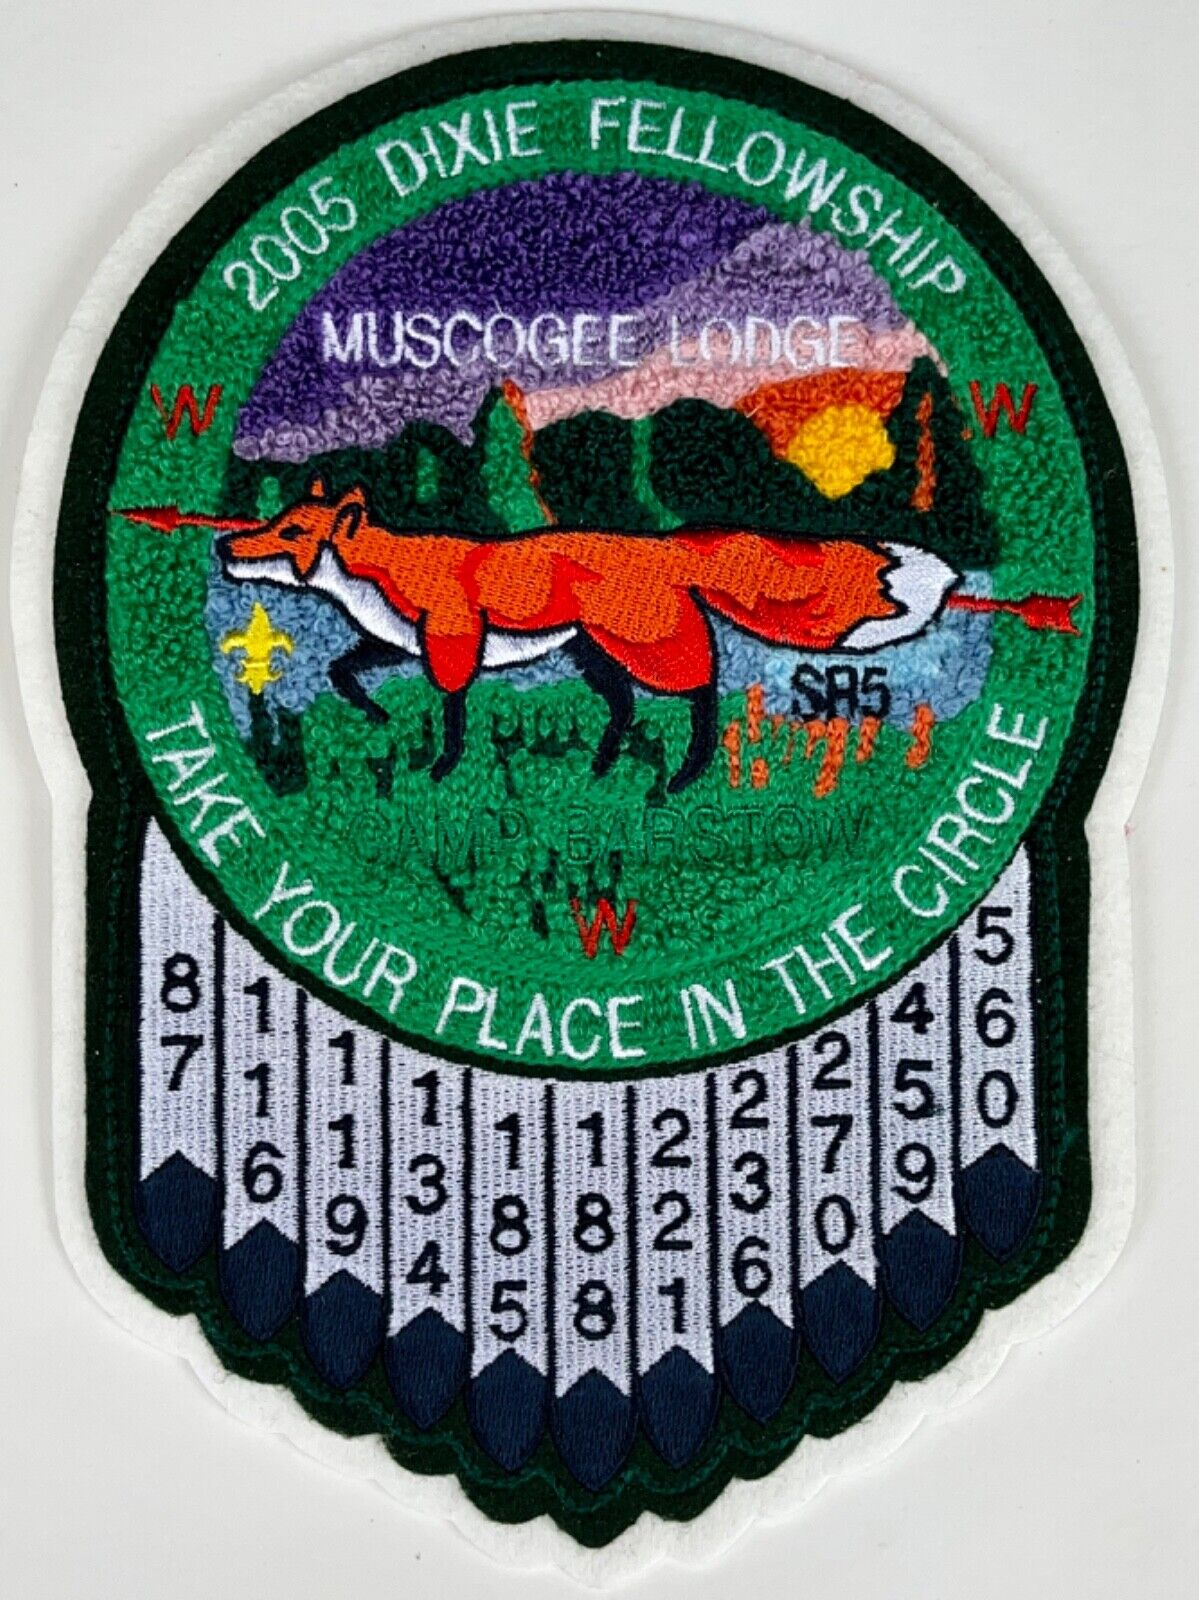 OA 2005 DIXIE FELLOWSHIP CHENILLE PATCH,MUSCOGEE LODGE 221 HOST, SECTION SR5,NEW